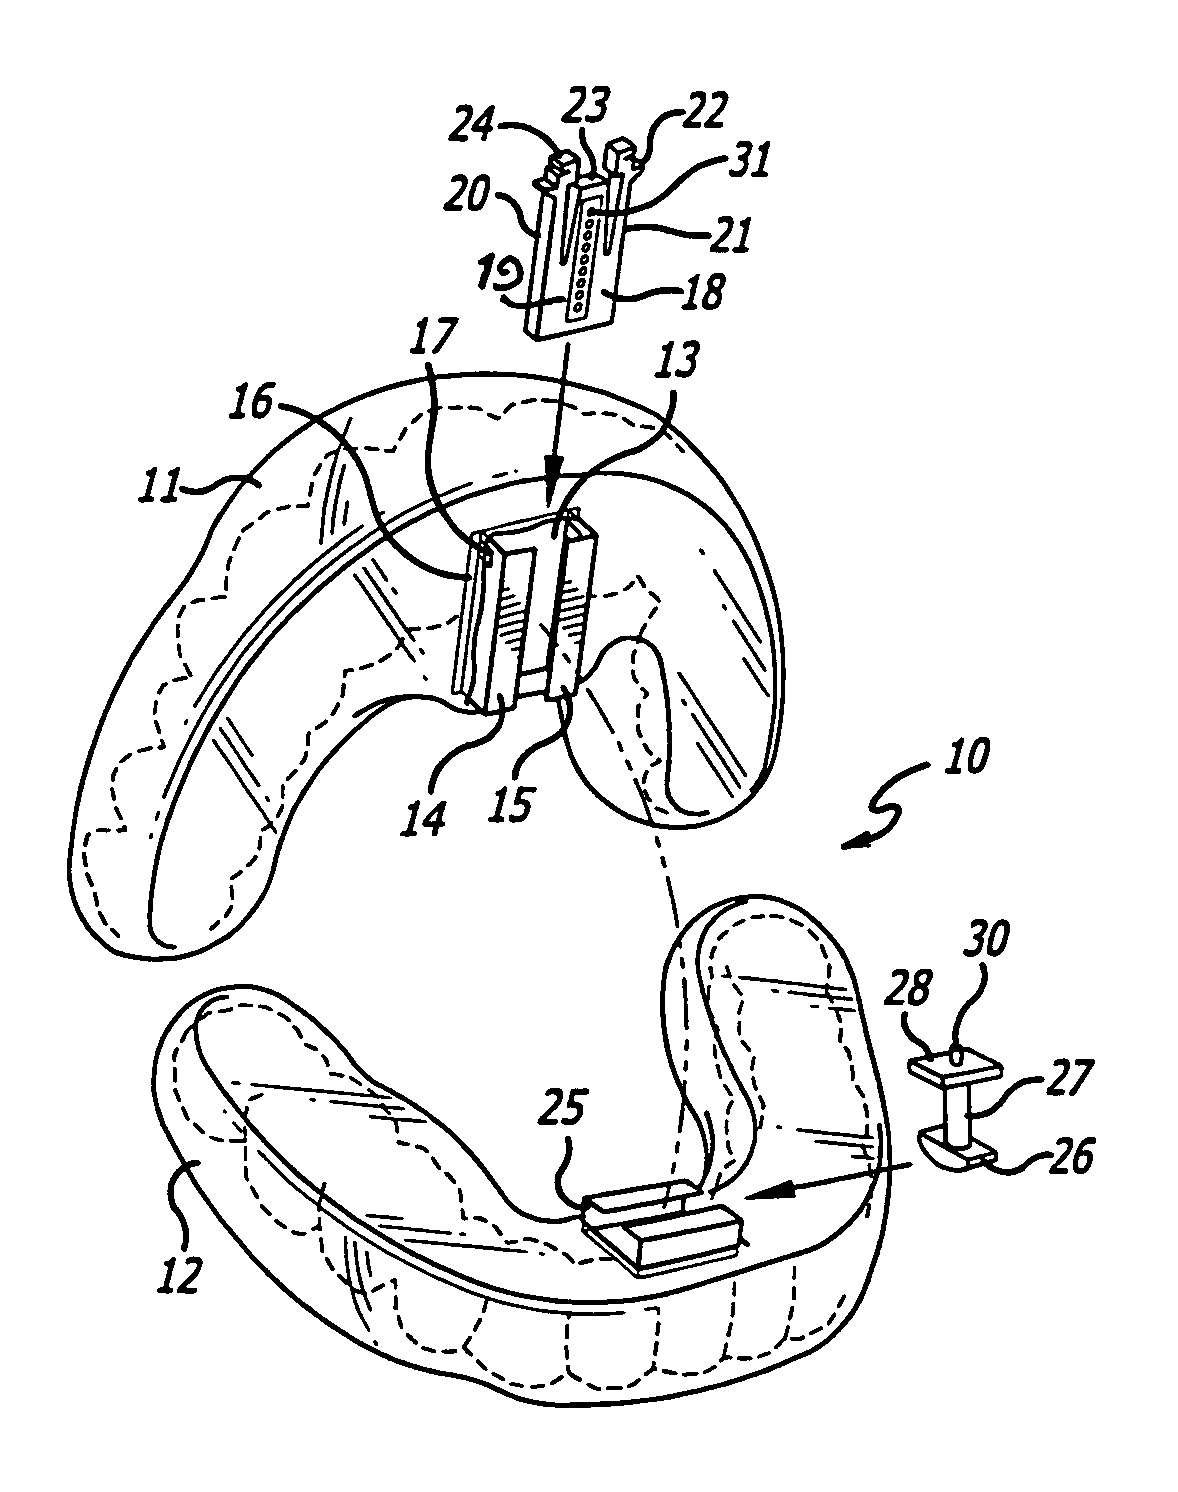 Fixed therapeutic oral appliance